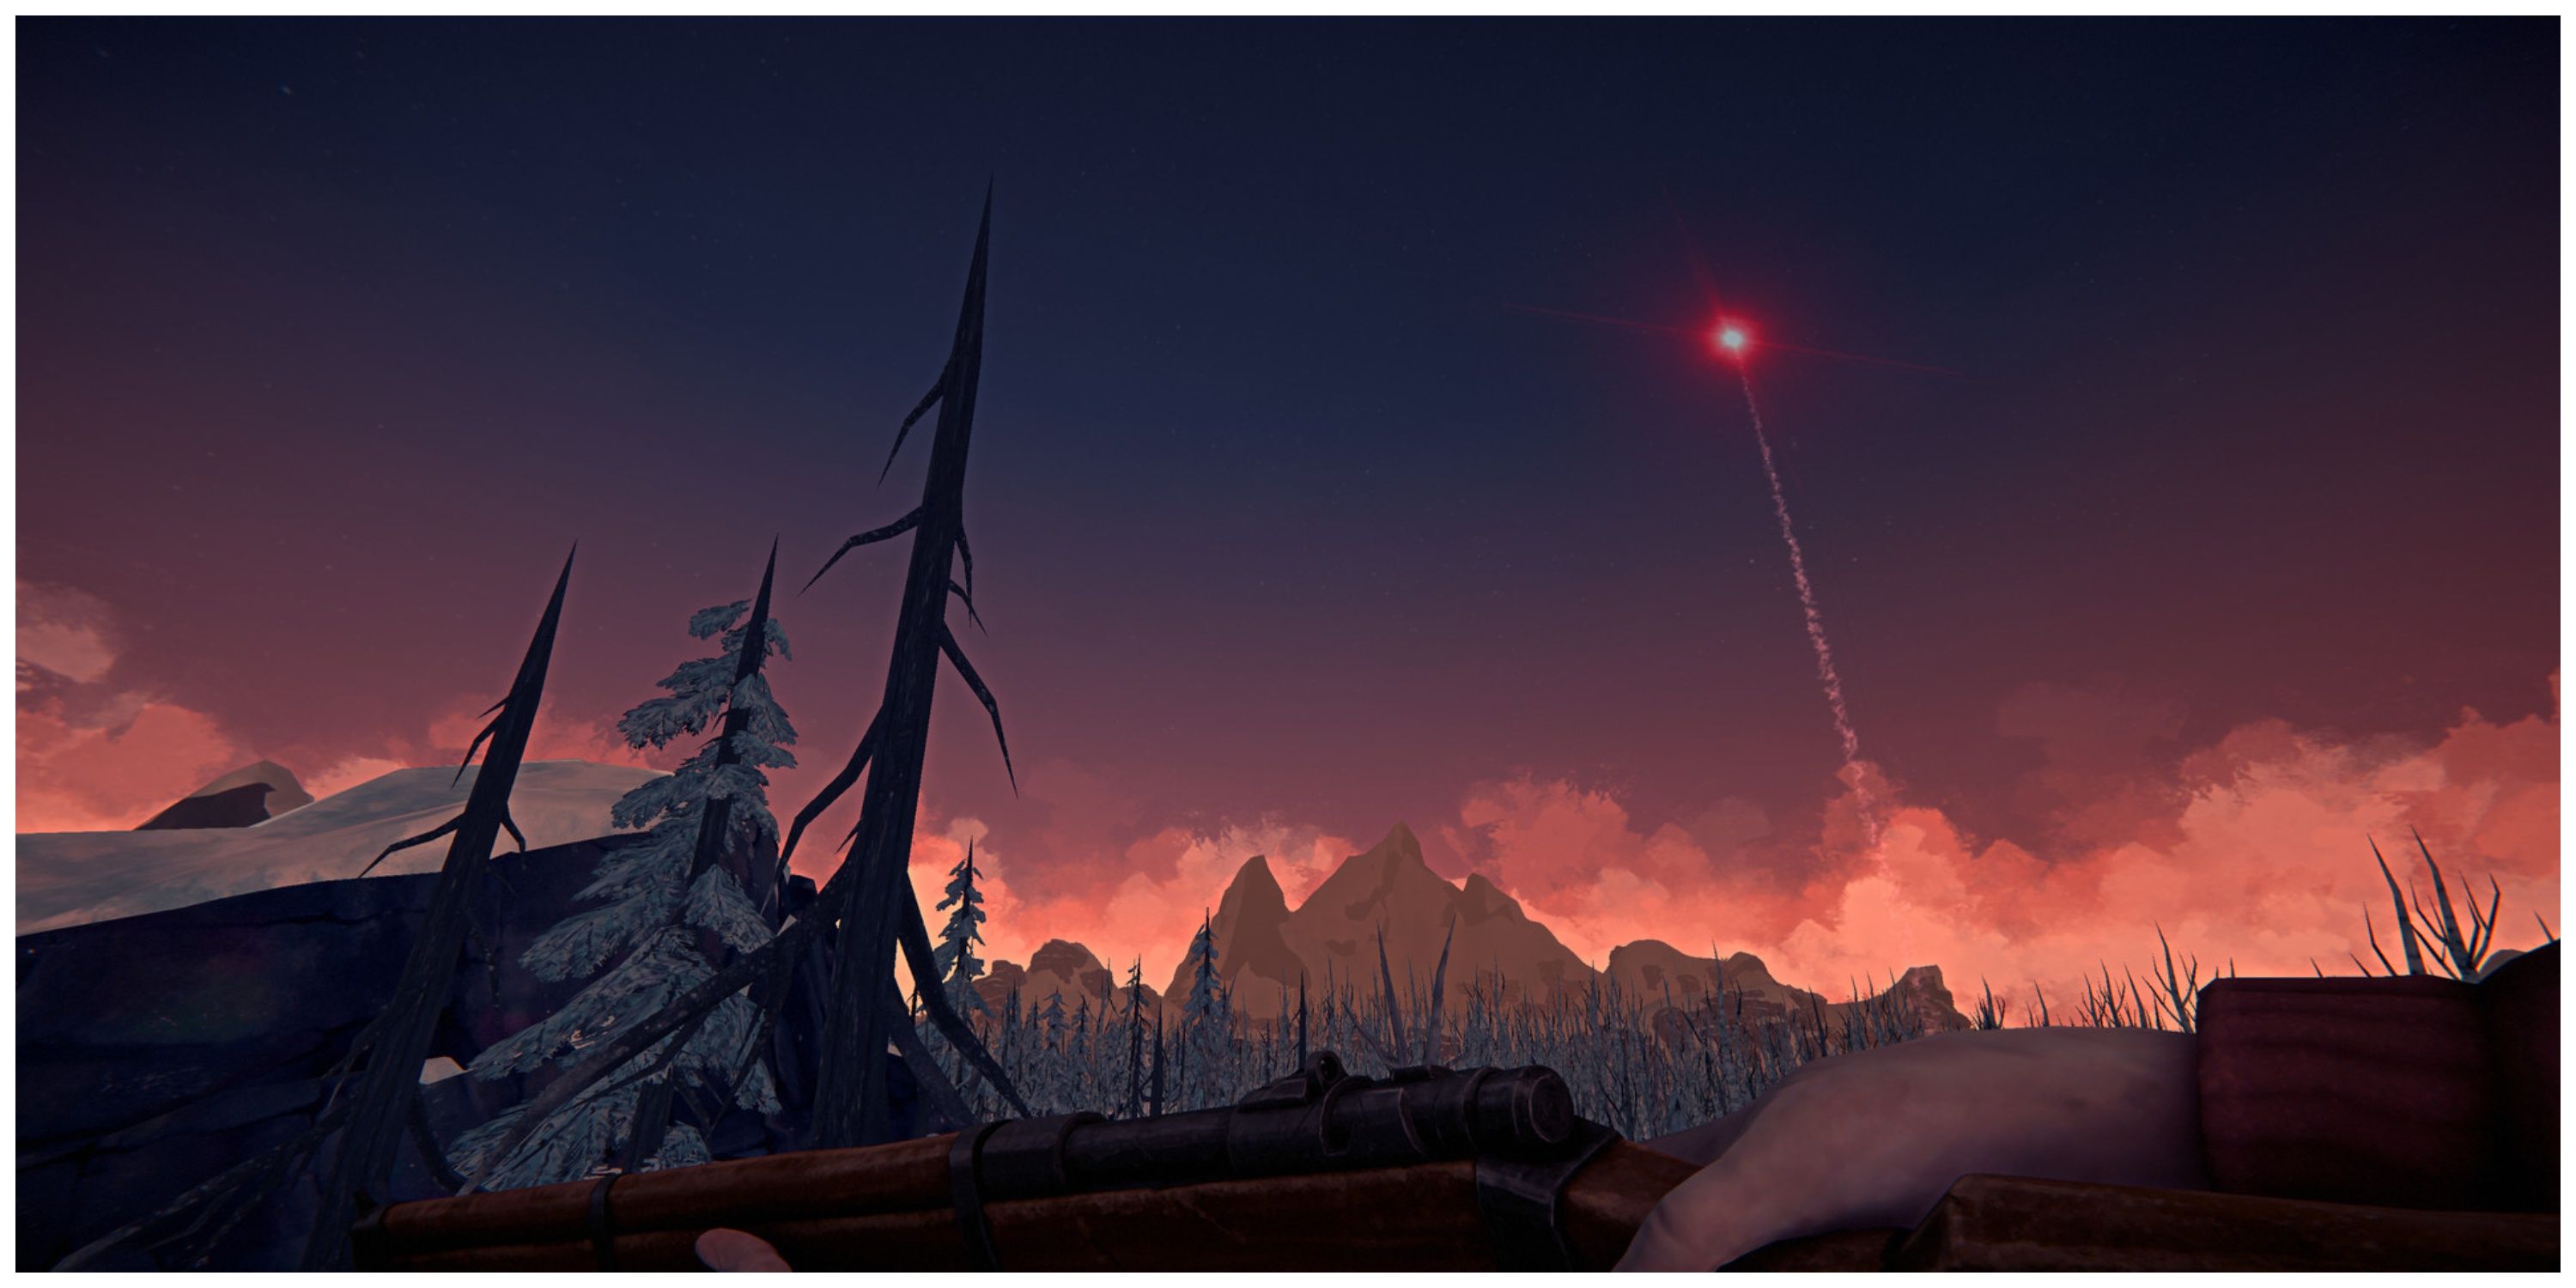 The Long Dark - Holding A Rifle While Watching A Flare